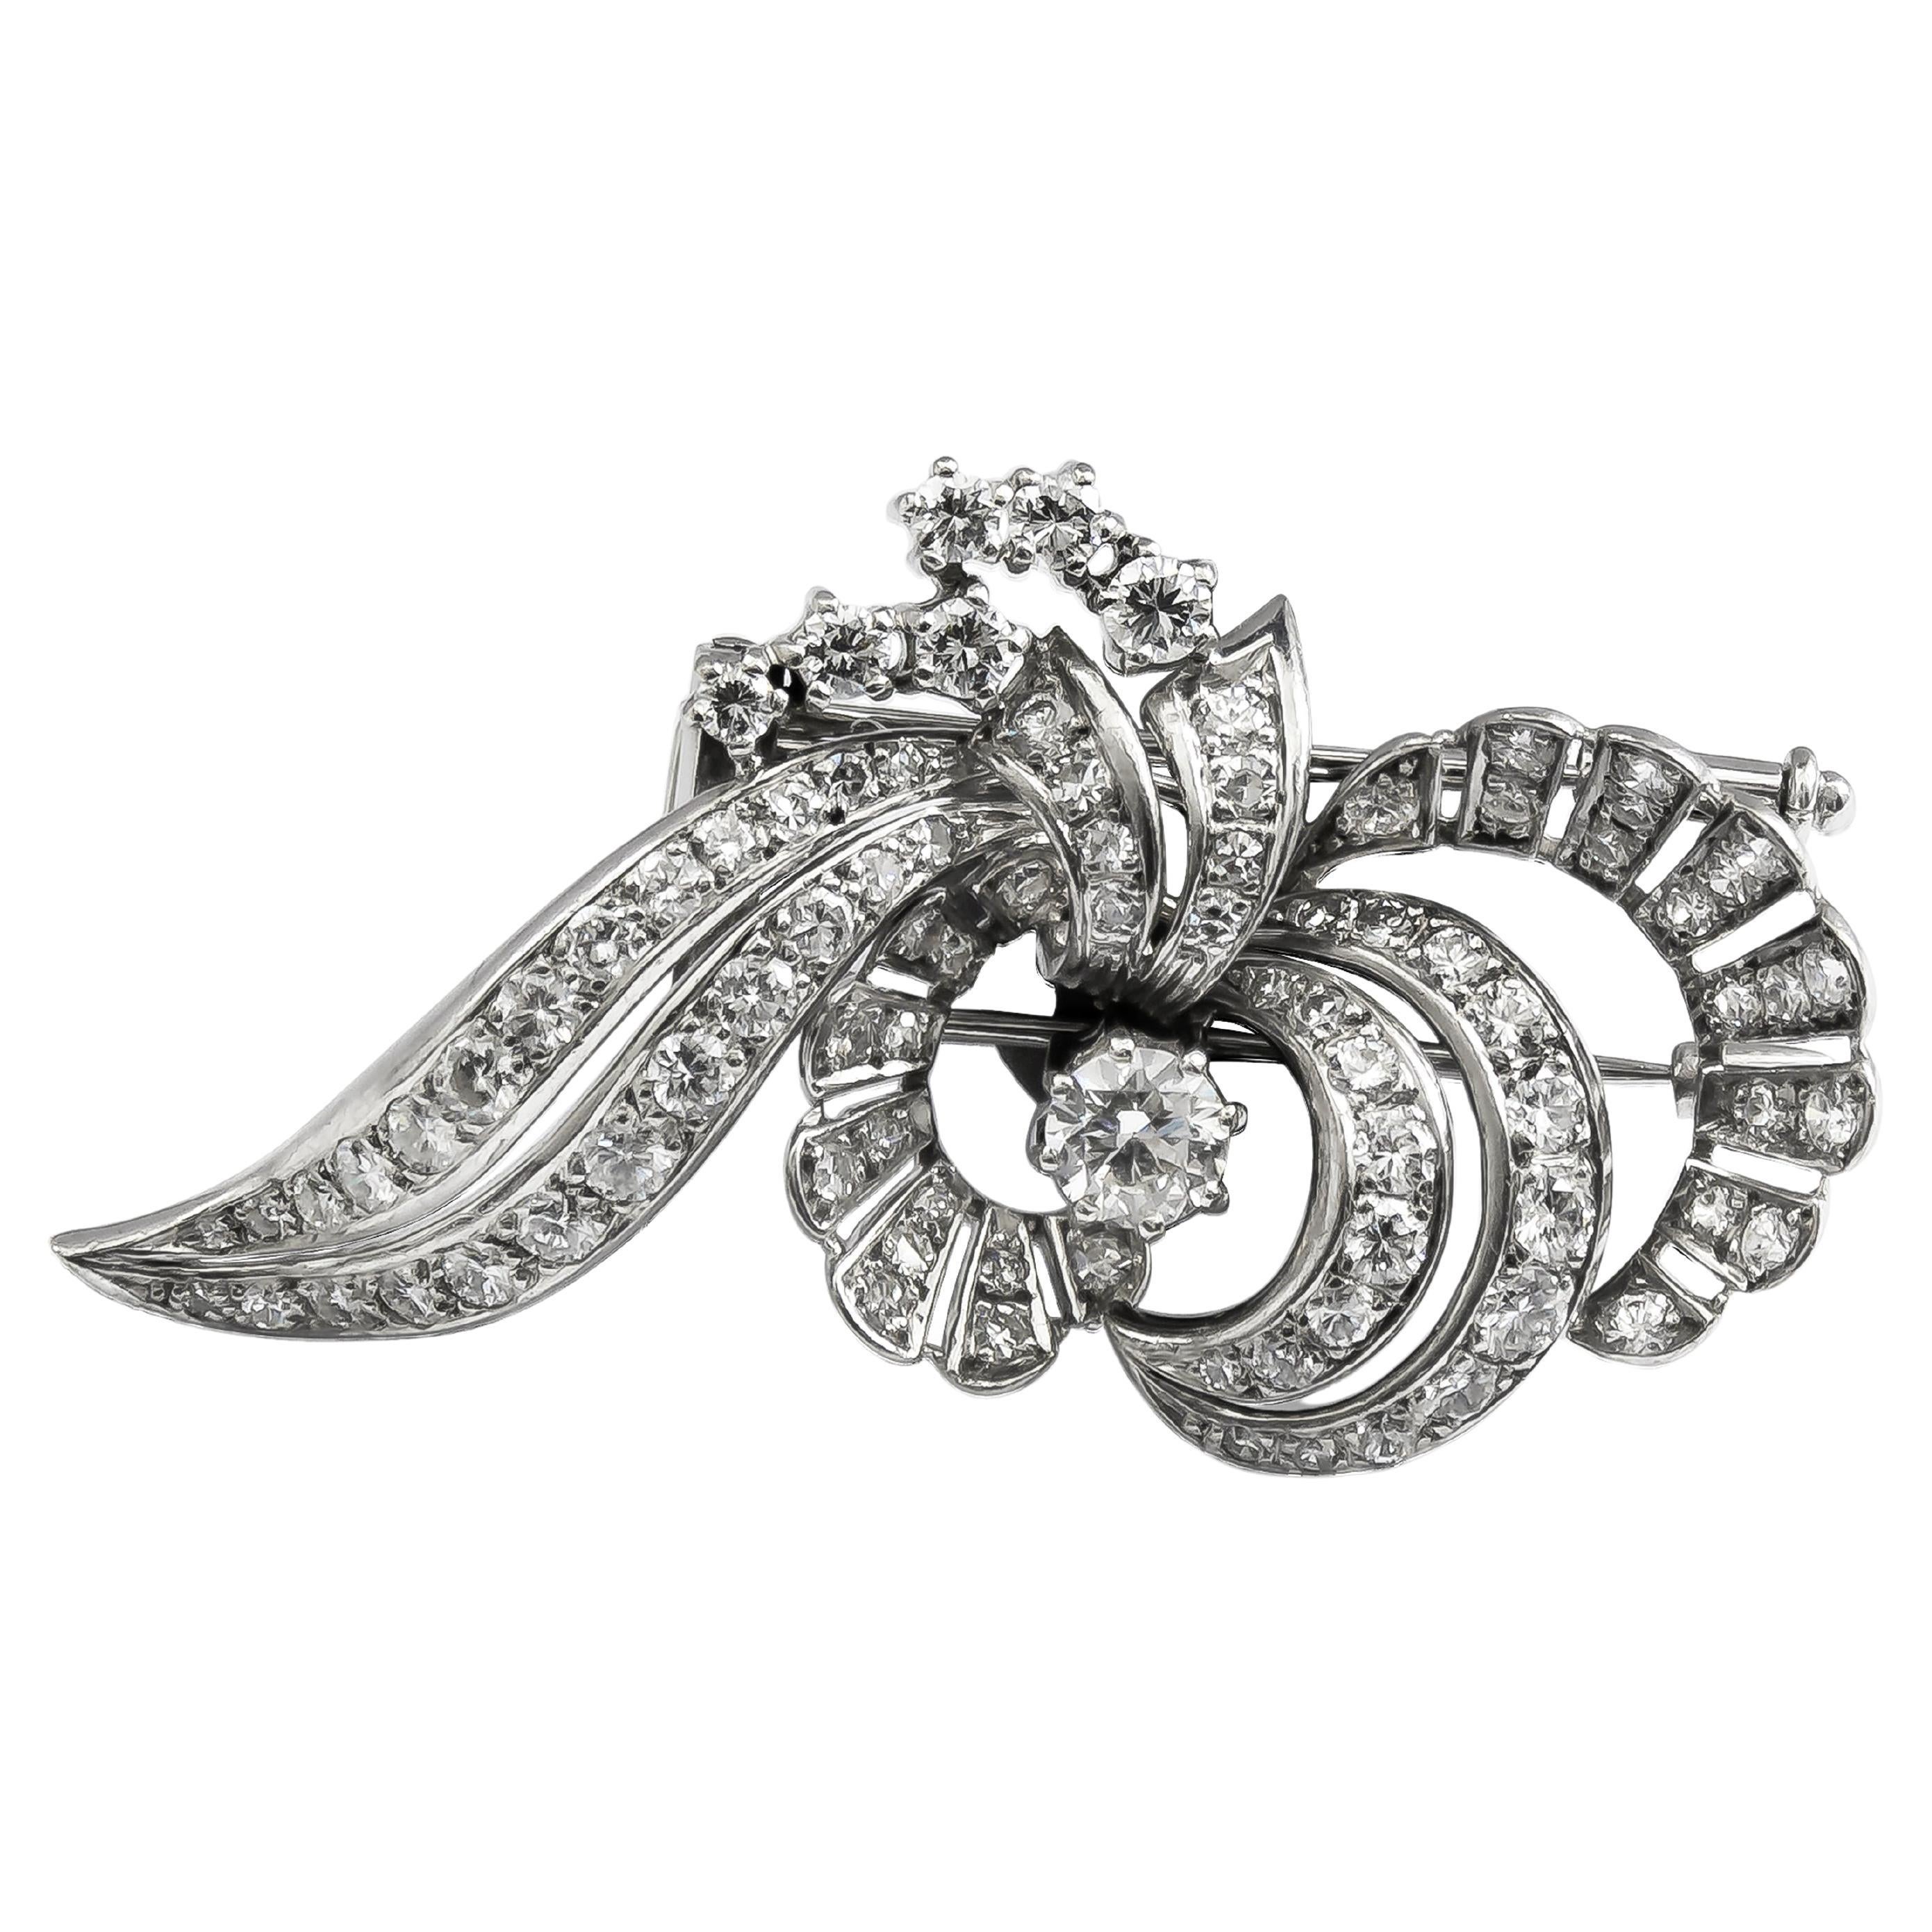 4.07 Carat Total Round Diamond Antique Style Brooch For Sale